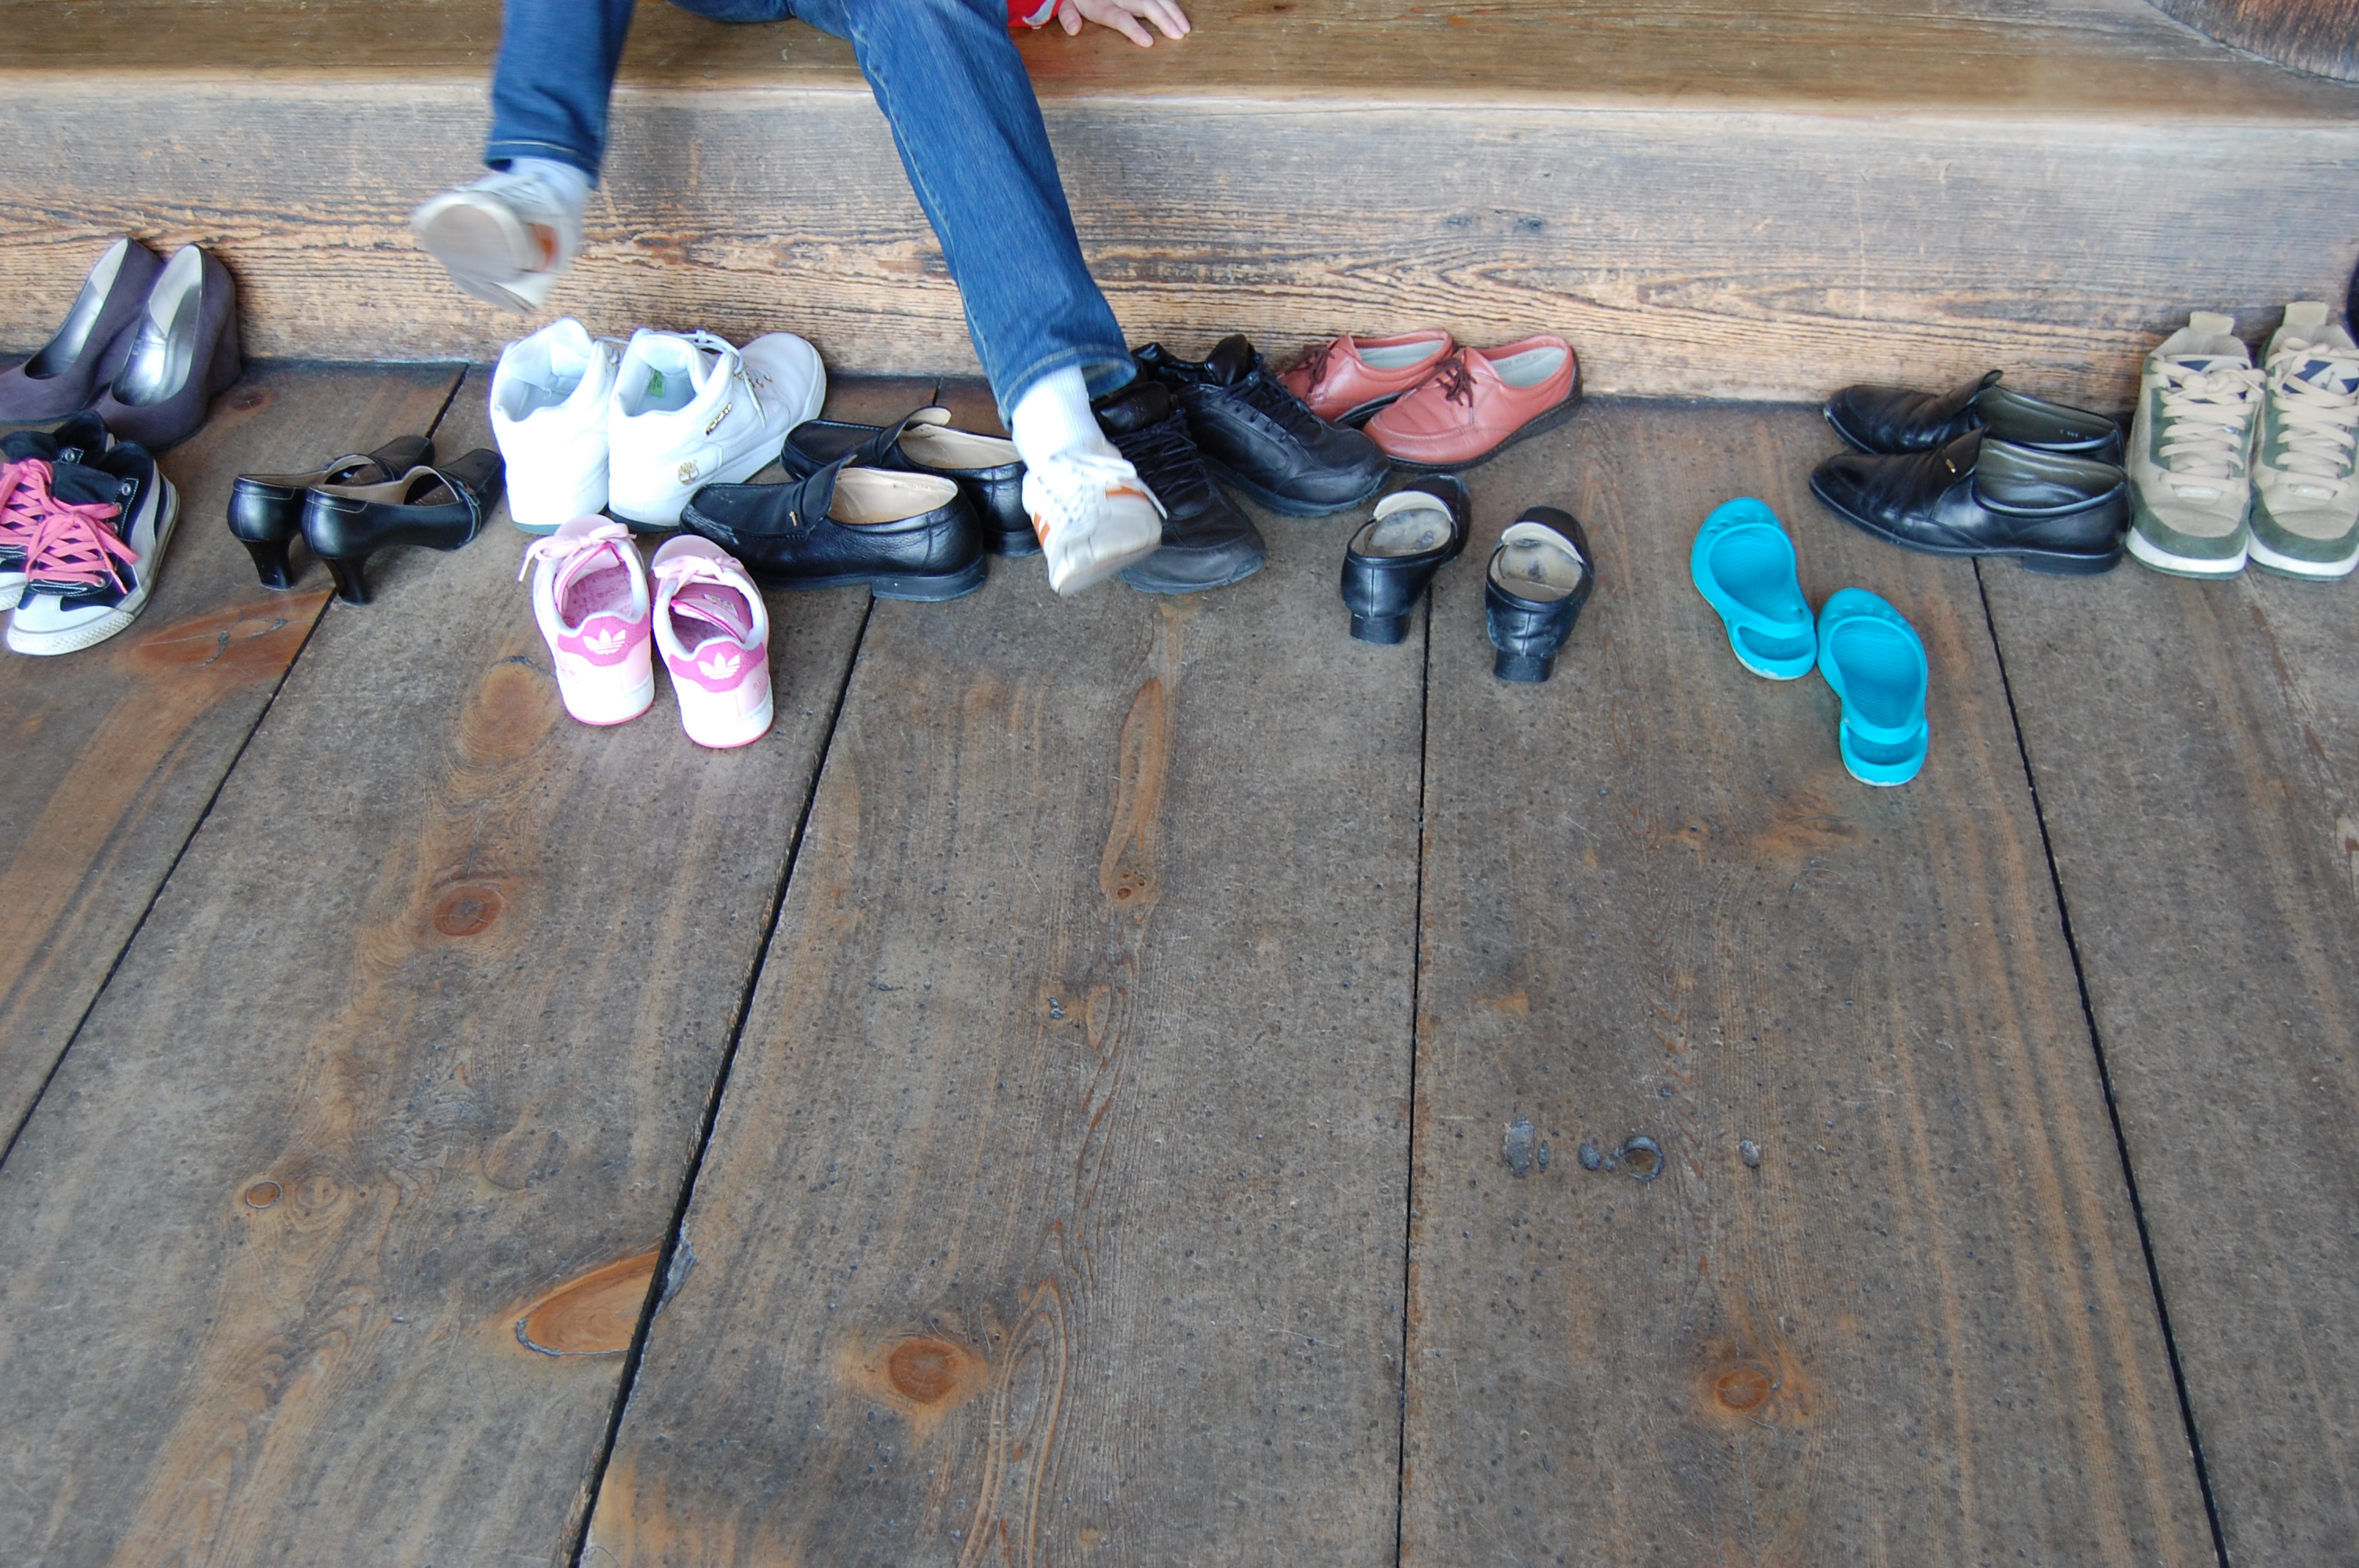 Shoes with Happy Feet: Photo by Sharon Burtner